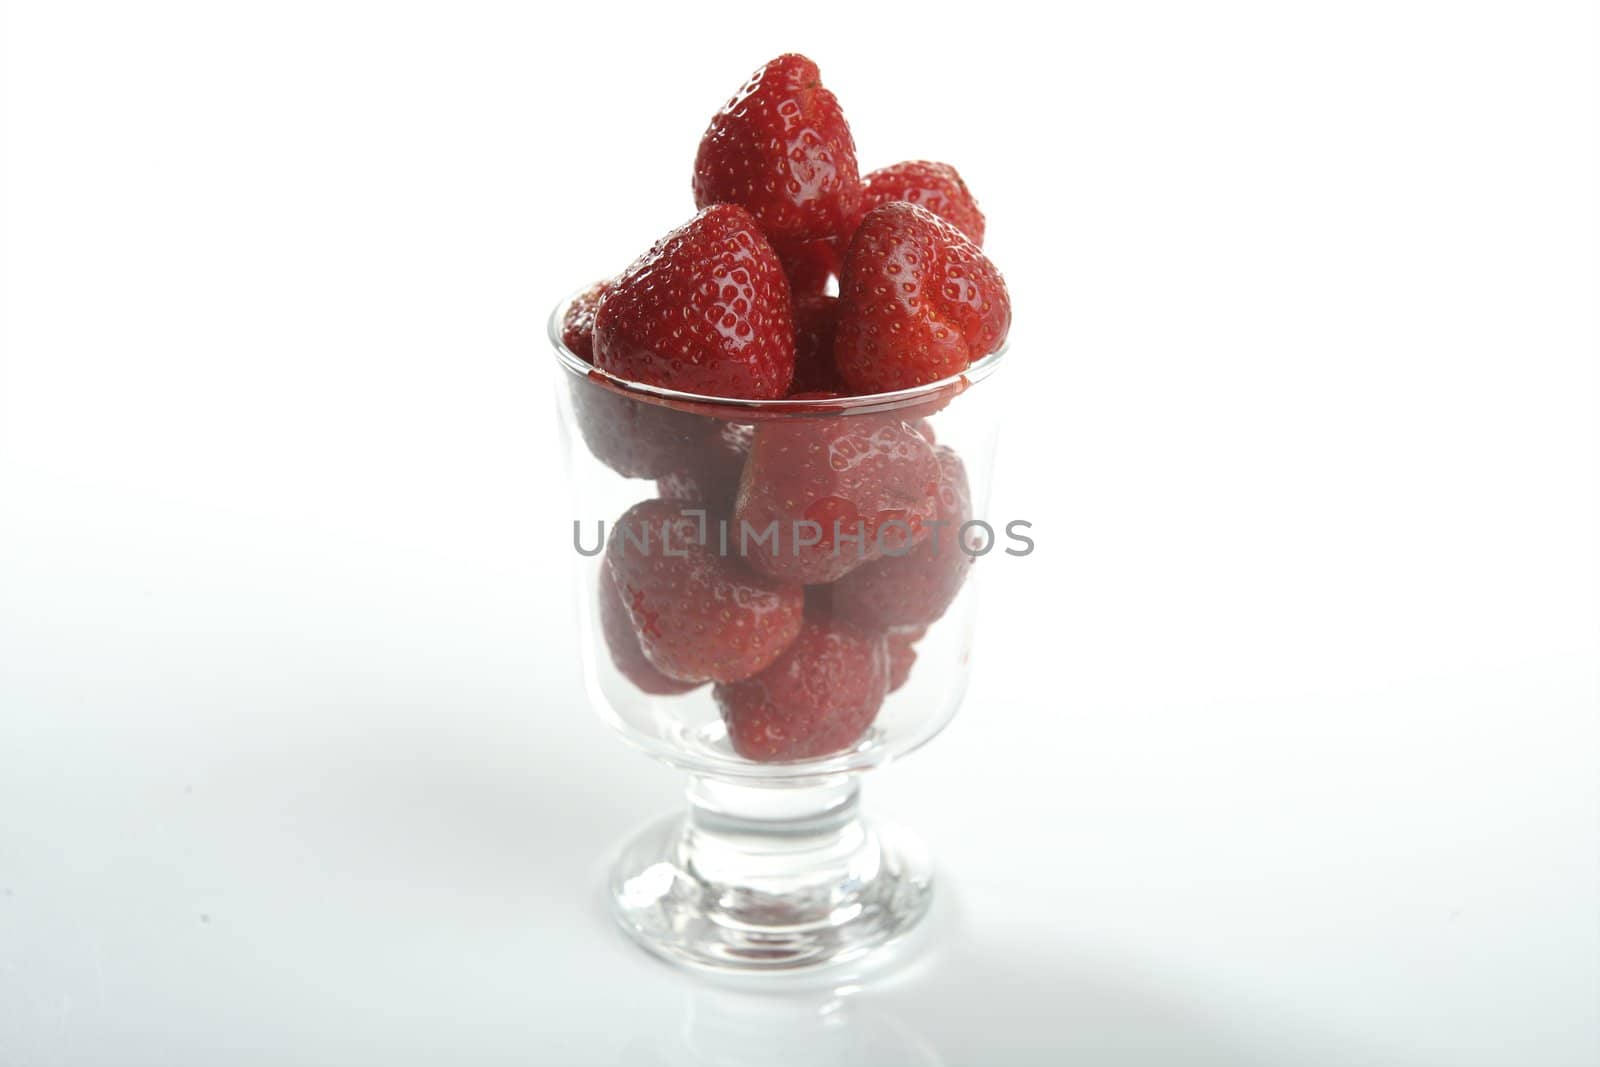 Cup of strawberries by lunamarina